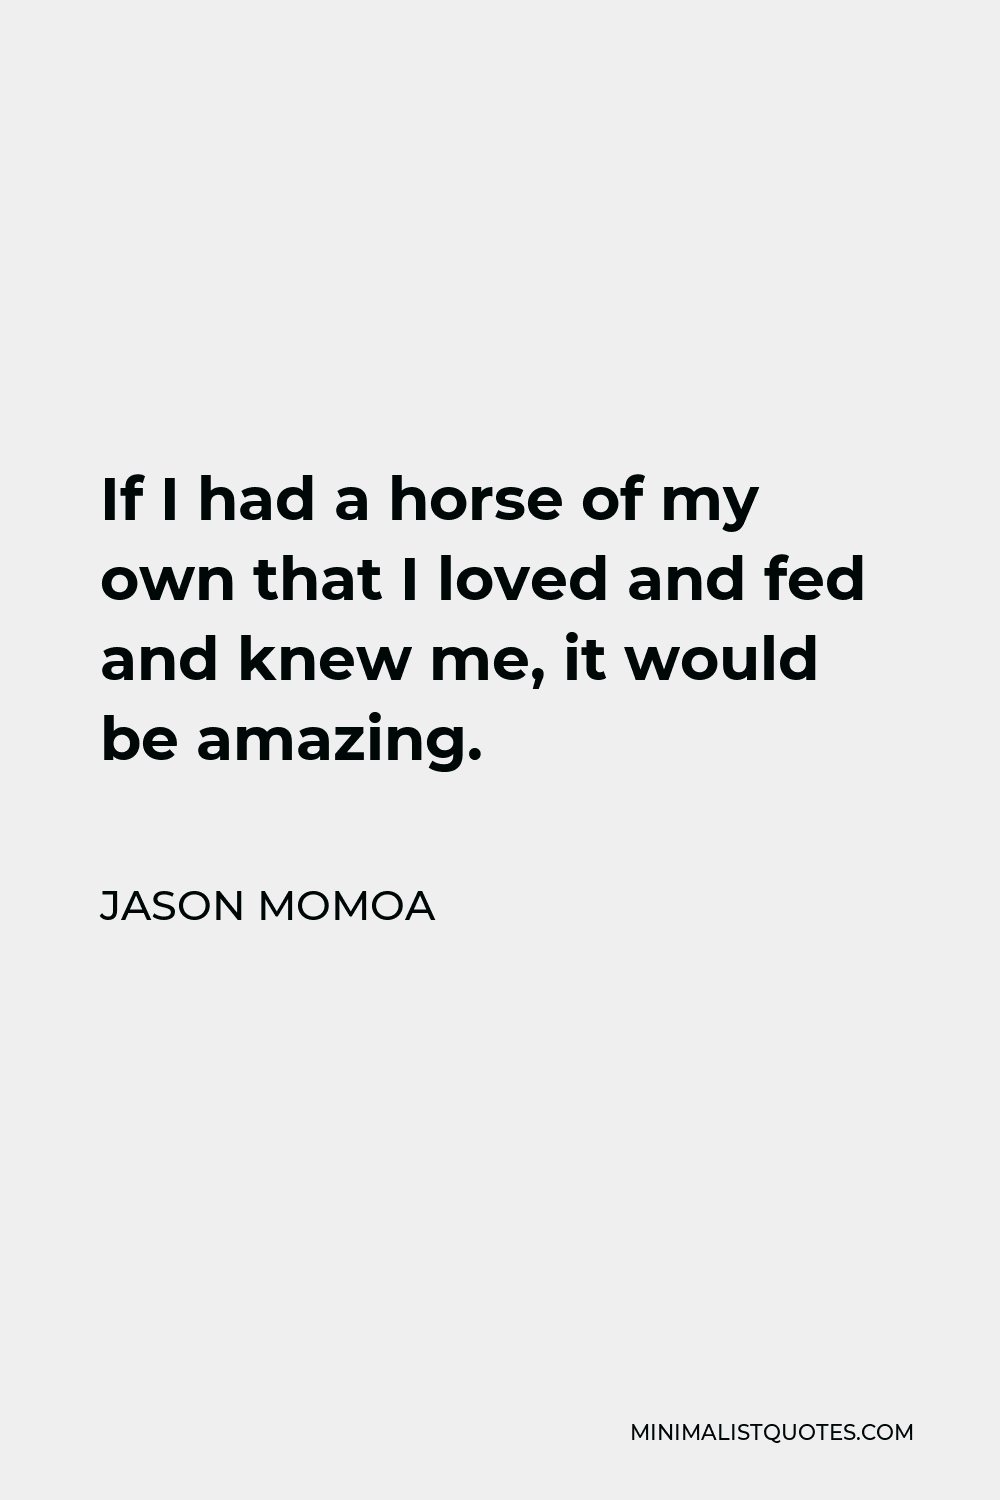 Jason Momoa Quote - If I had a horse of my own that I loved and fed and knew me, it would be amazing.